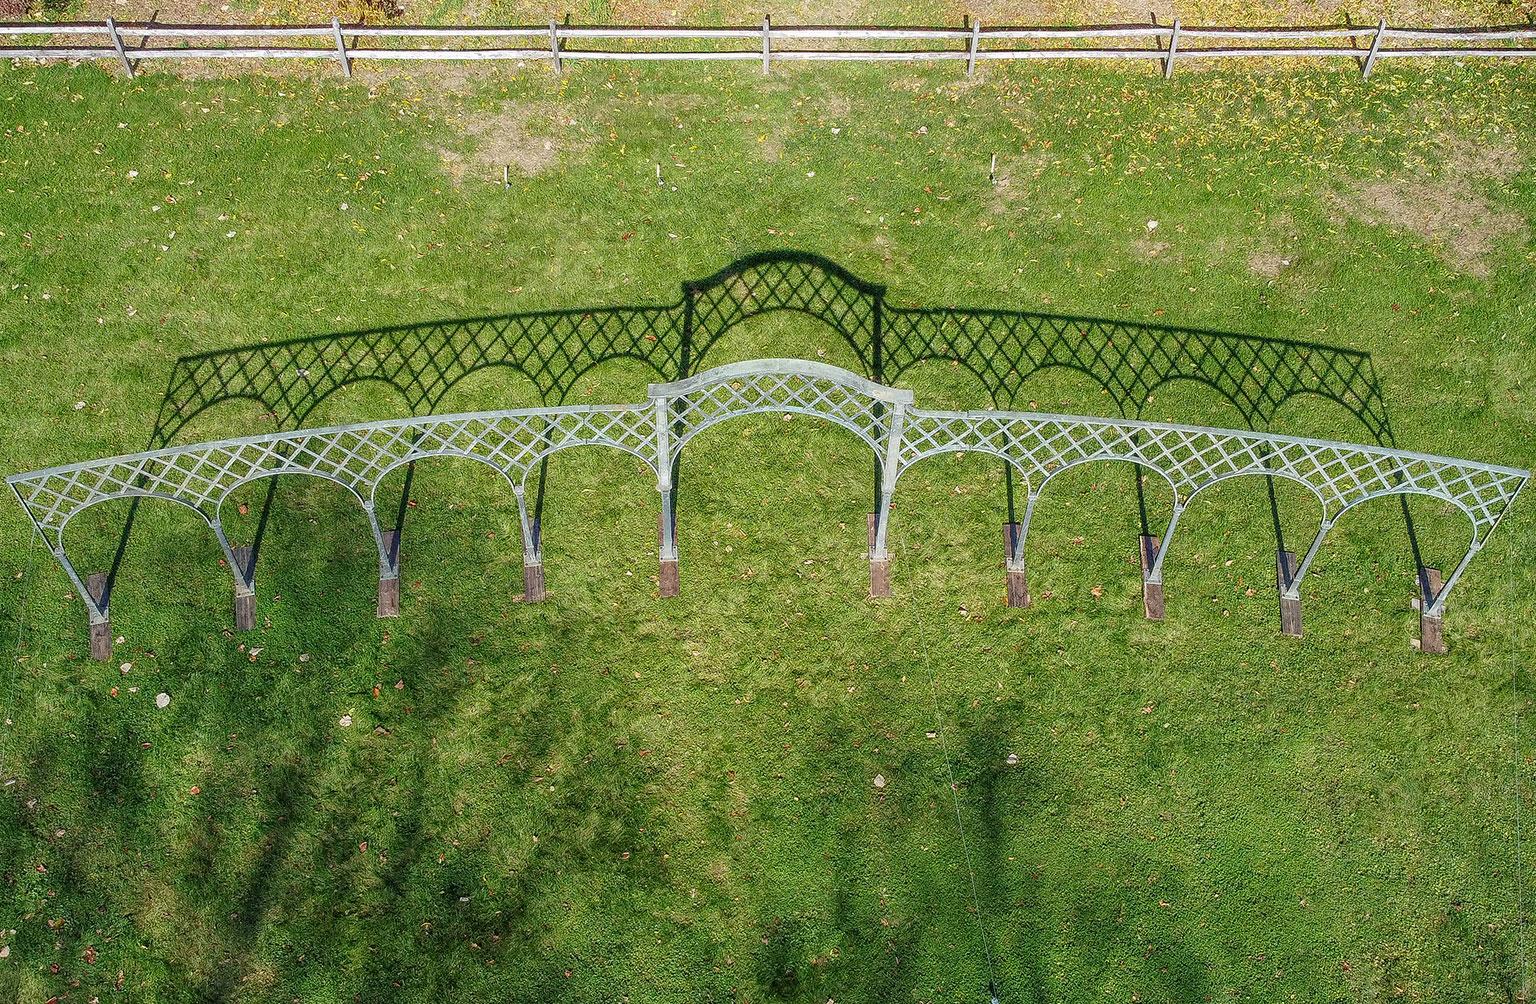 A large bronze arched trellis, in two curved sections, formerly installed at the rose garden at Kykuit, the John D. Rockefeller estate, having been designed by architect Mott Schmitt in 1952, and installed sometime between 1952 and 1957. It was